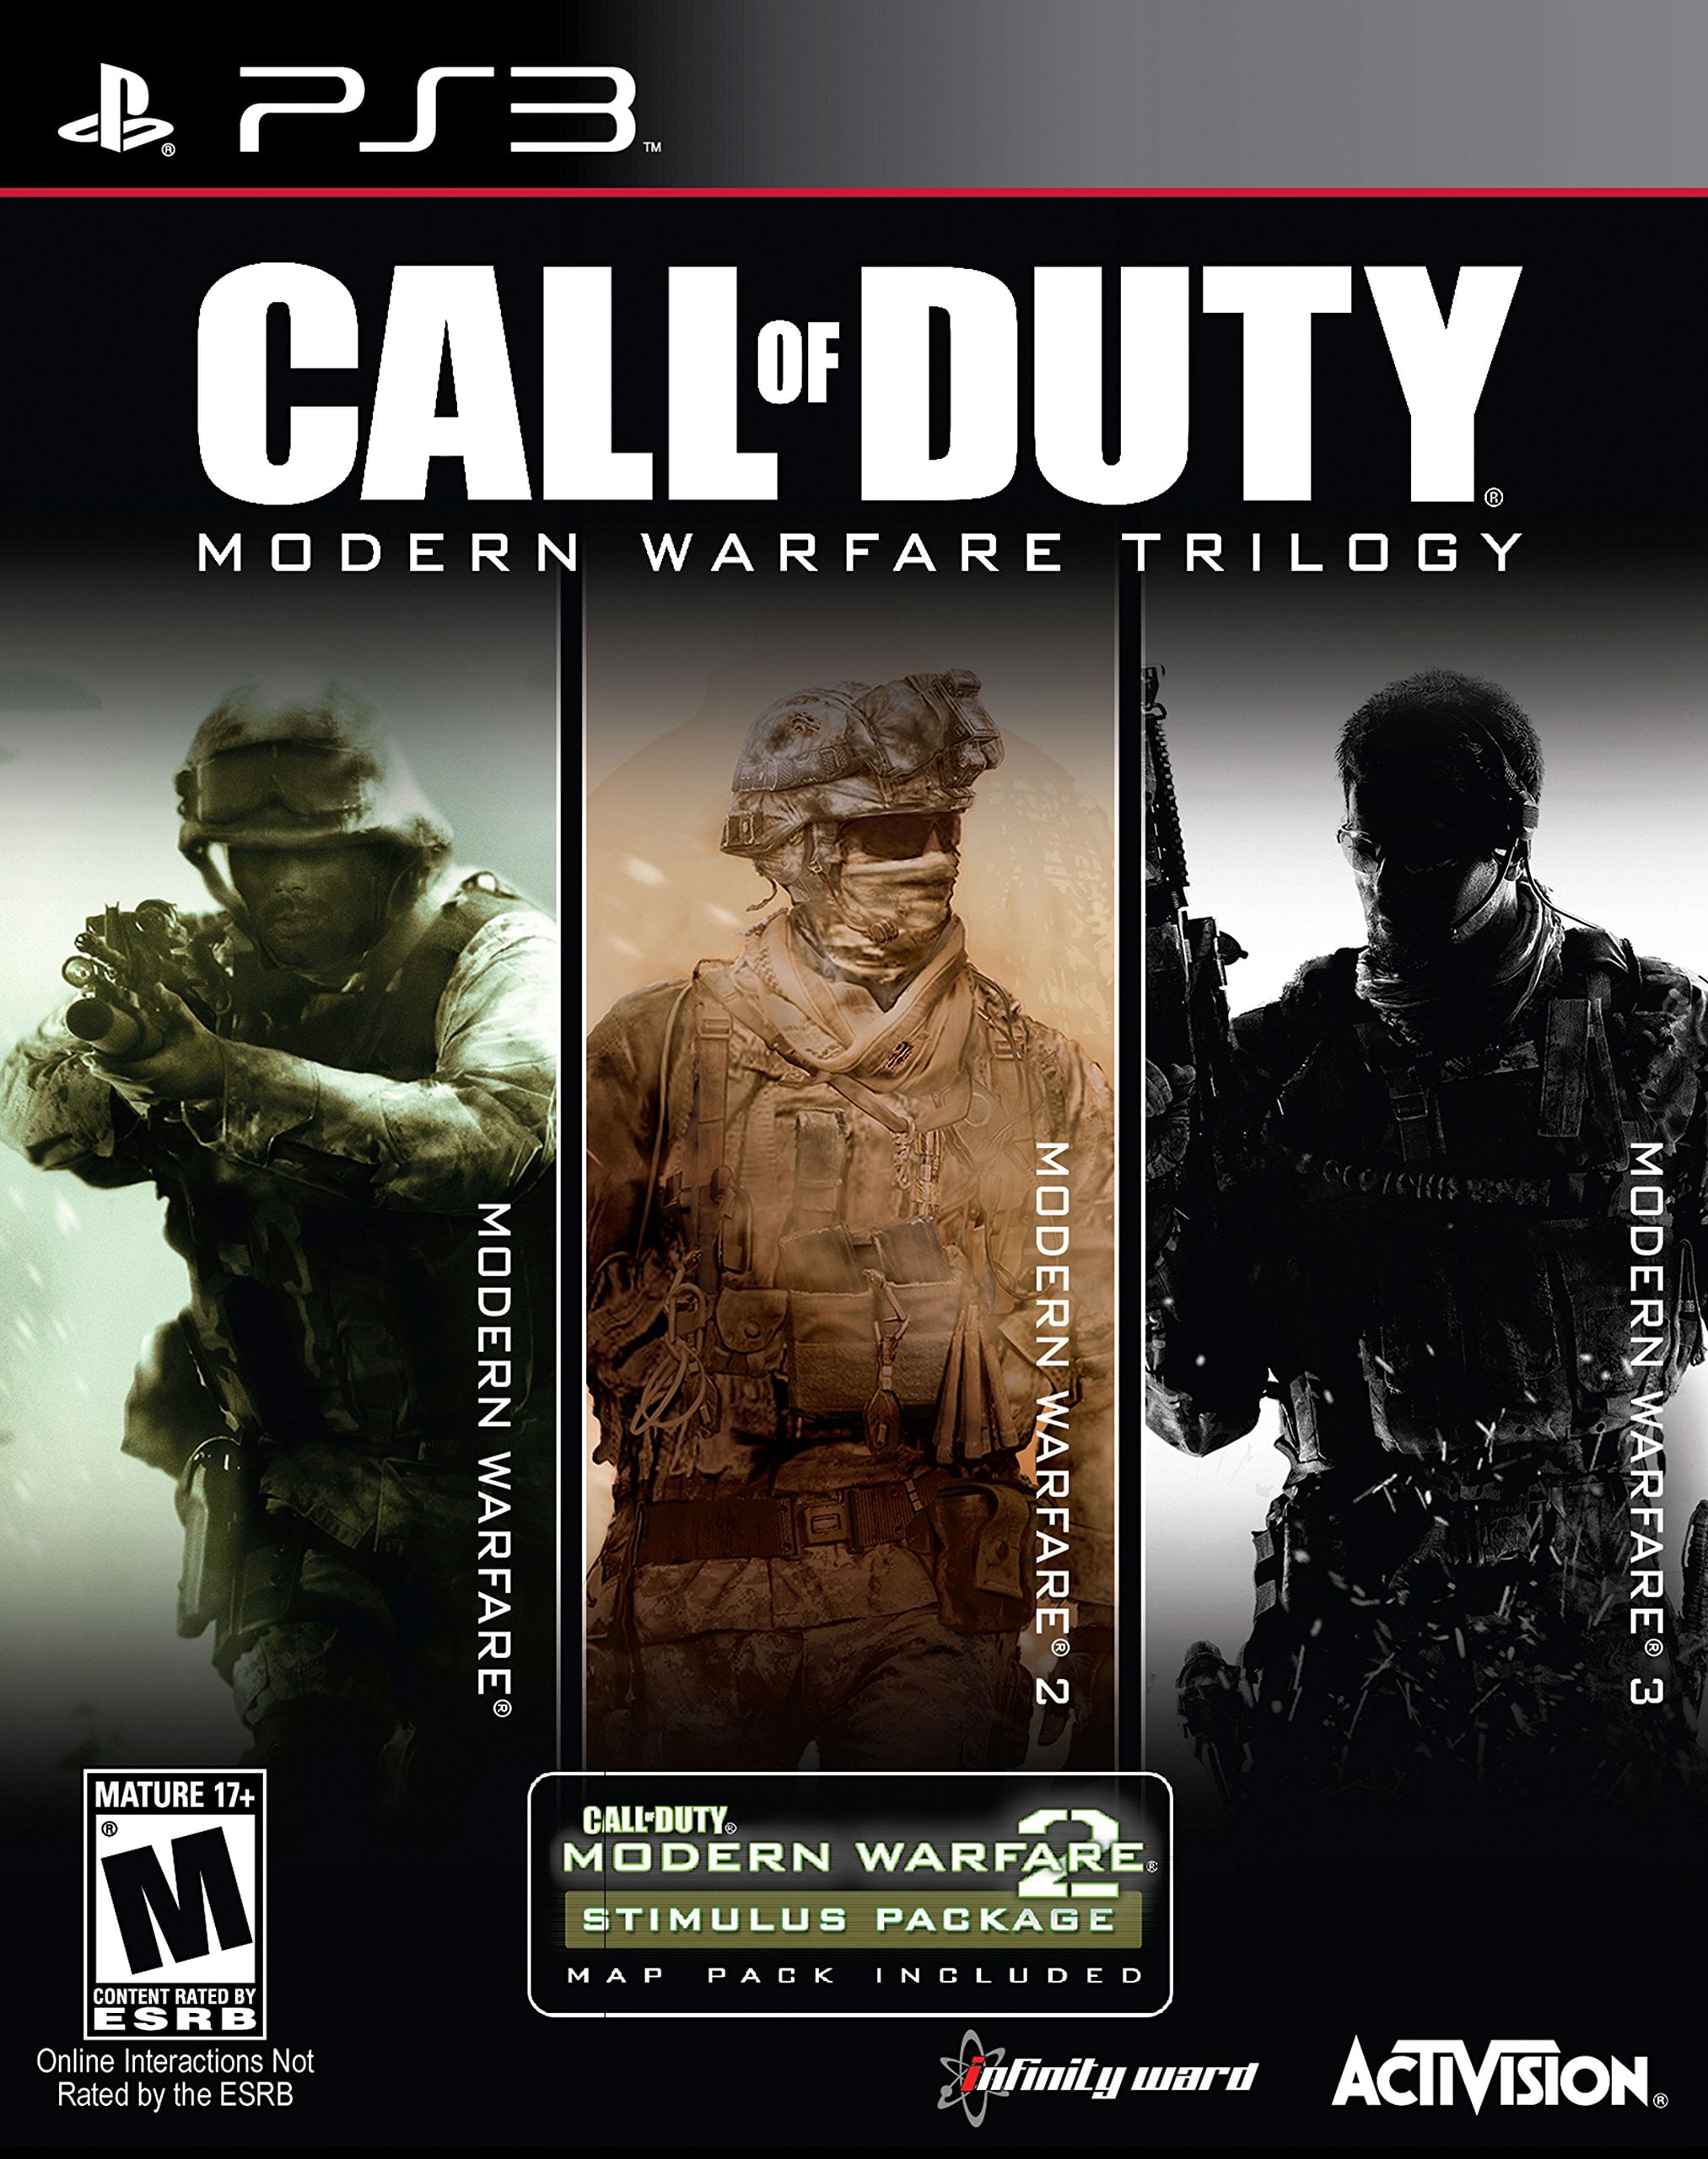 Call of Duty: Modern Warfare Trilogy [3 Discs], Activision, PlayStation 3,  047875878075 